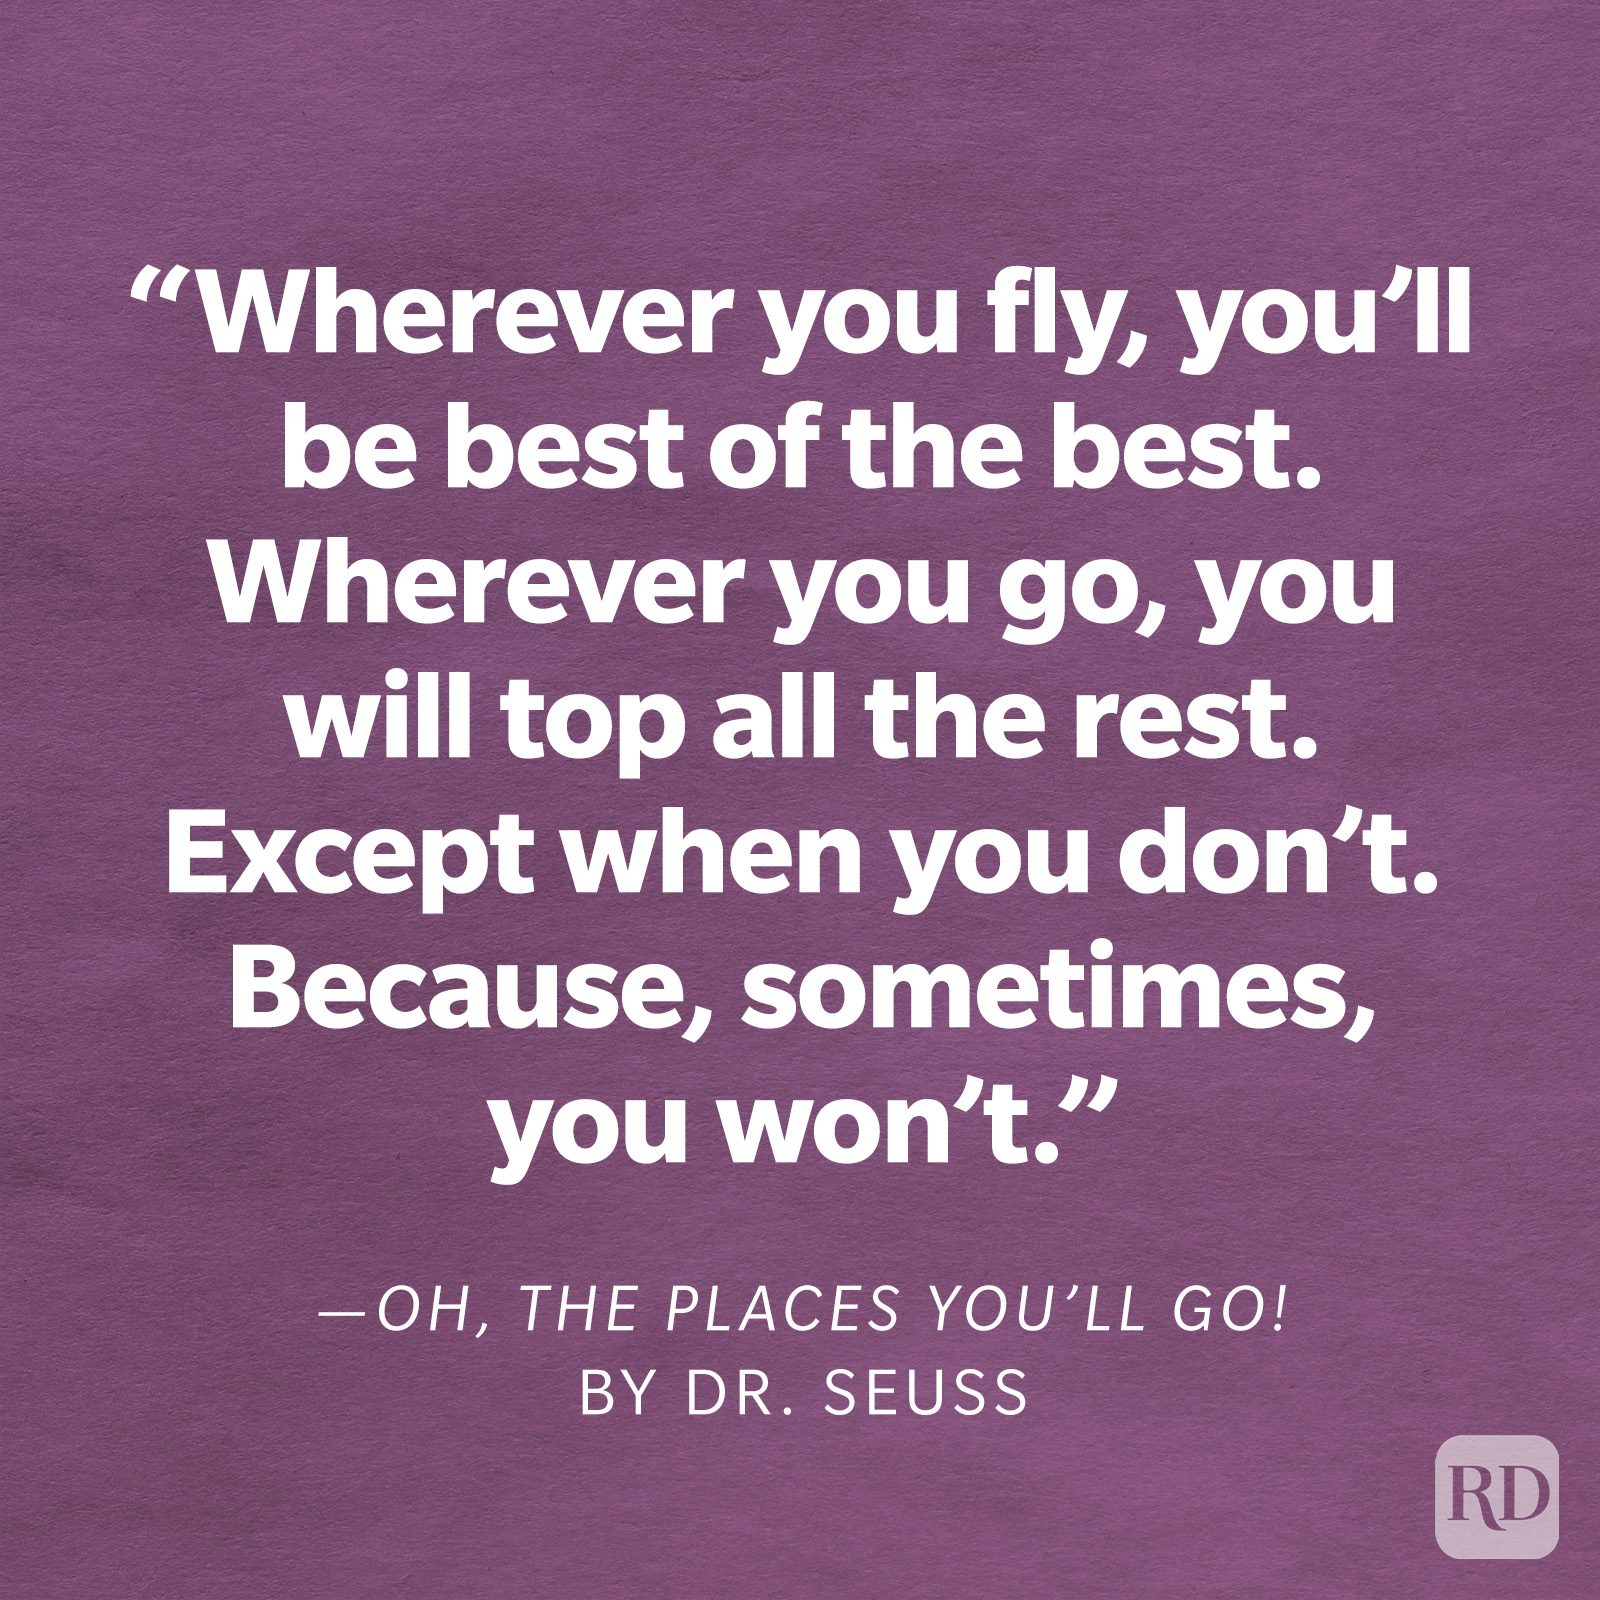 Oh, The Places You'll Go! by Dr. Seuss "Wherever you fly, you'll be best of the best. Wherever you go, you will top all the rest. Except when you don't. Because, sometimes, you won't. I'm sorry to say so but, sadly, it's true that Bang-ups and Hang-ups can happen to you."